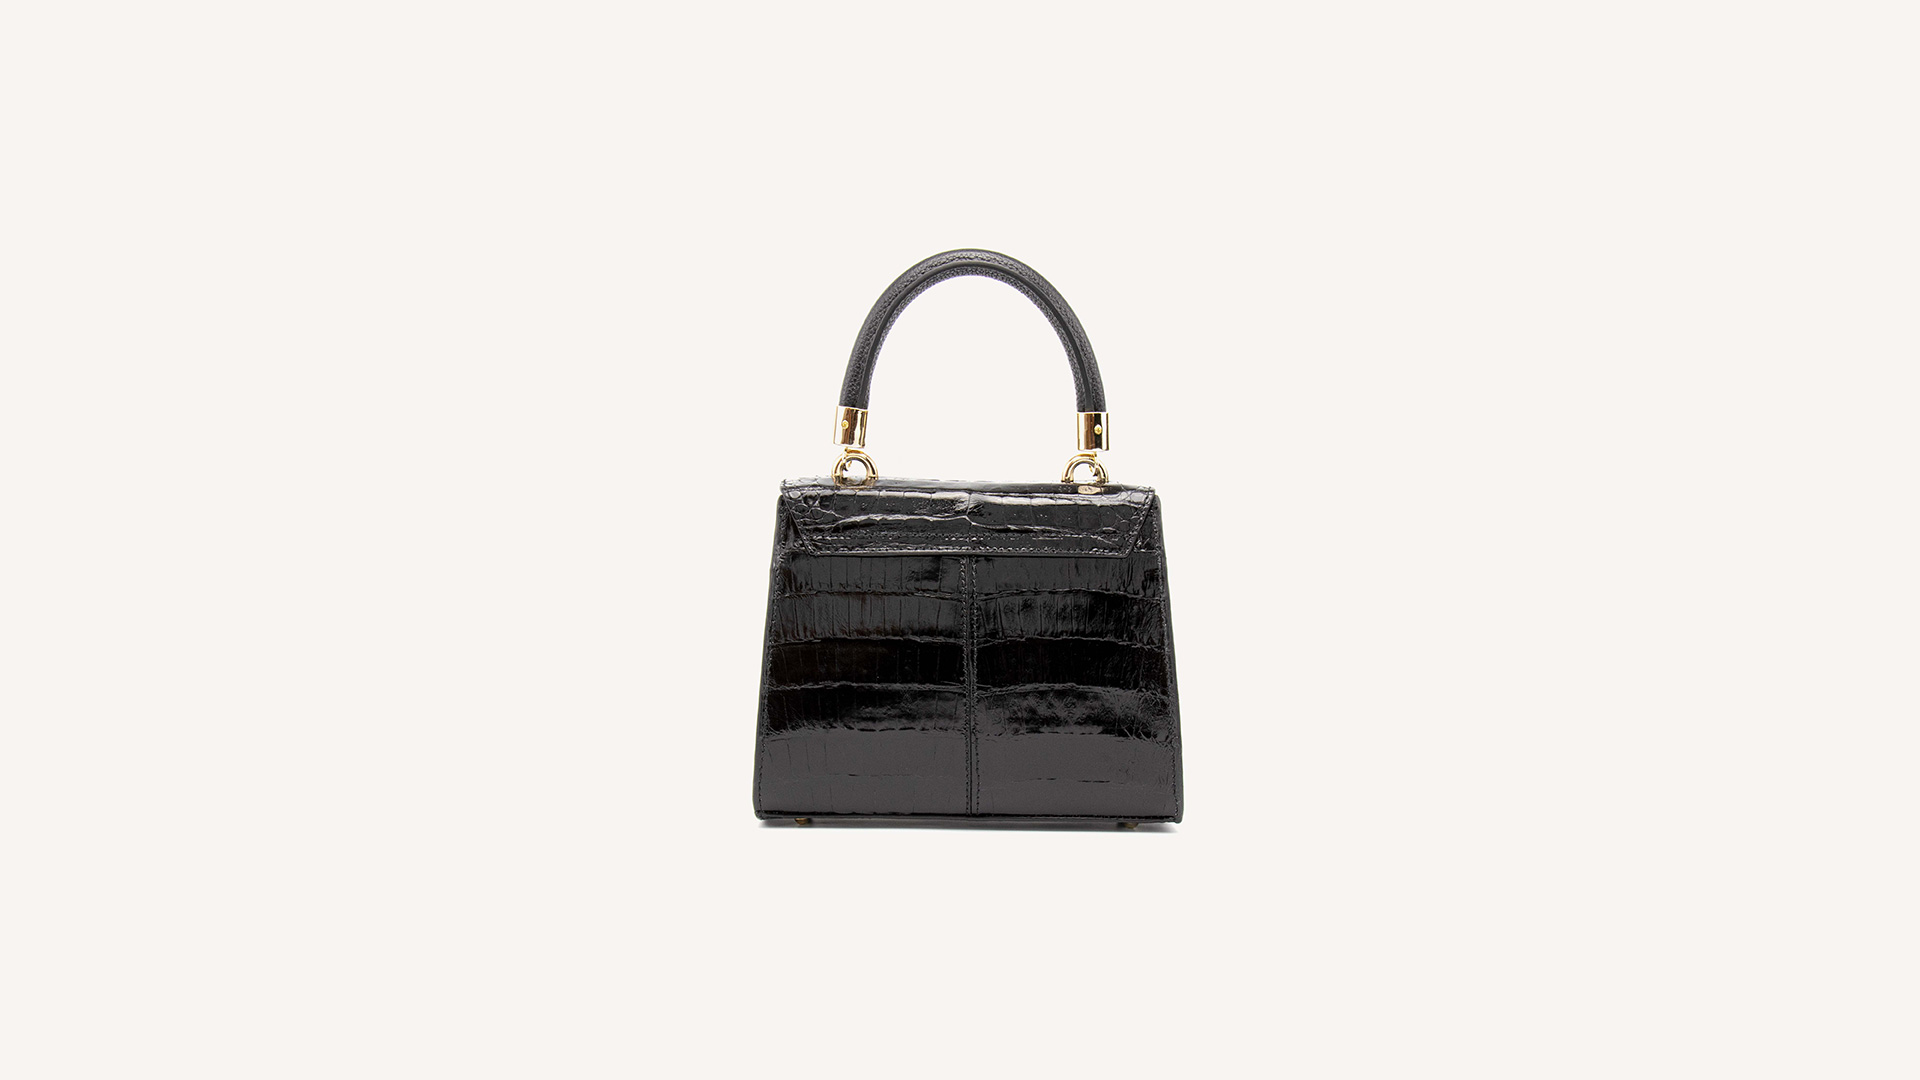 Buy Black Leather Pouch, Croco Embossed